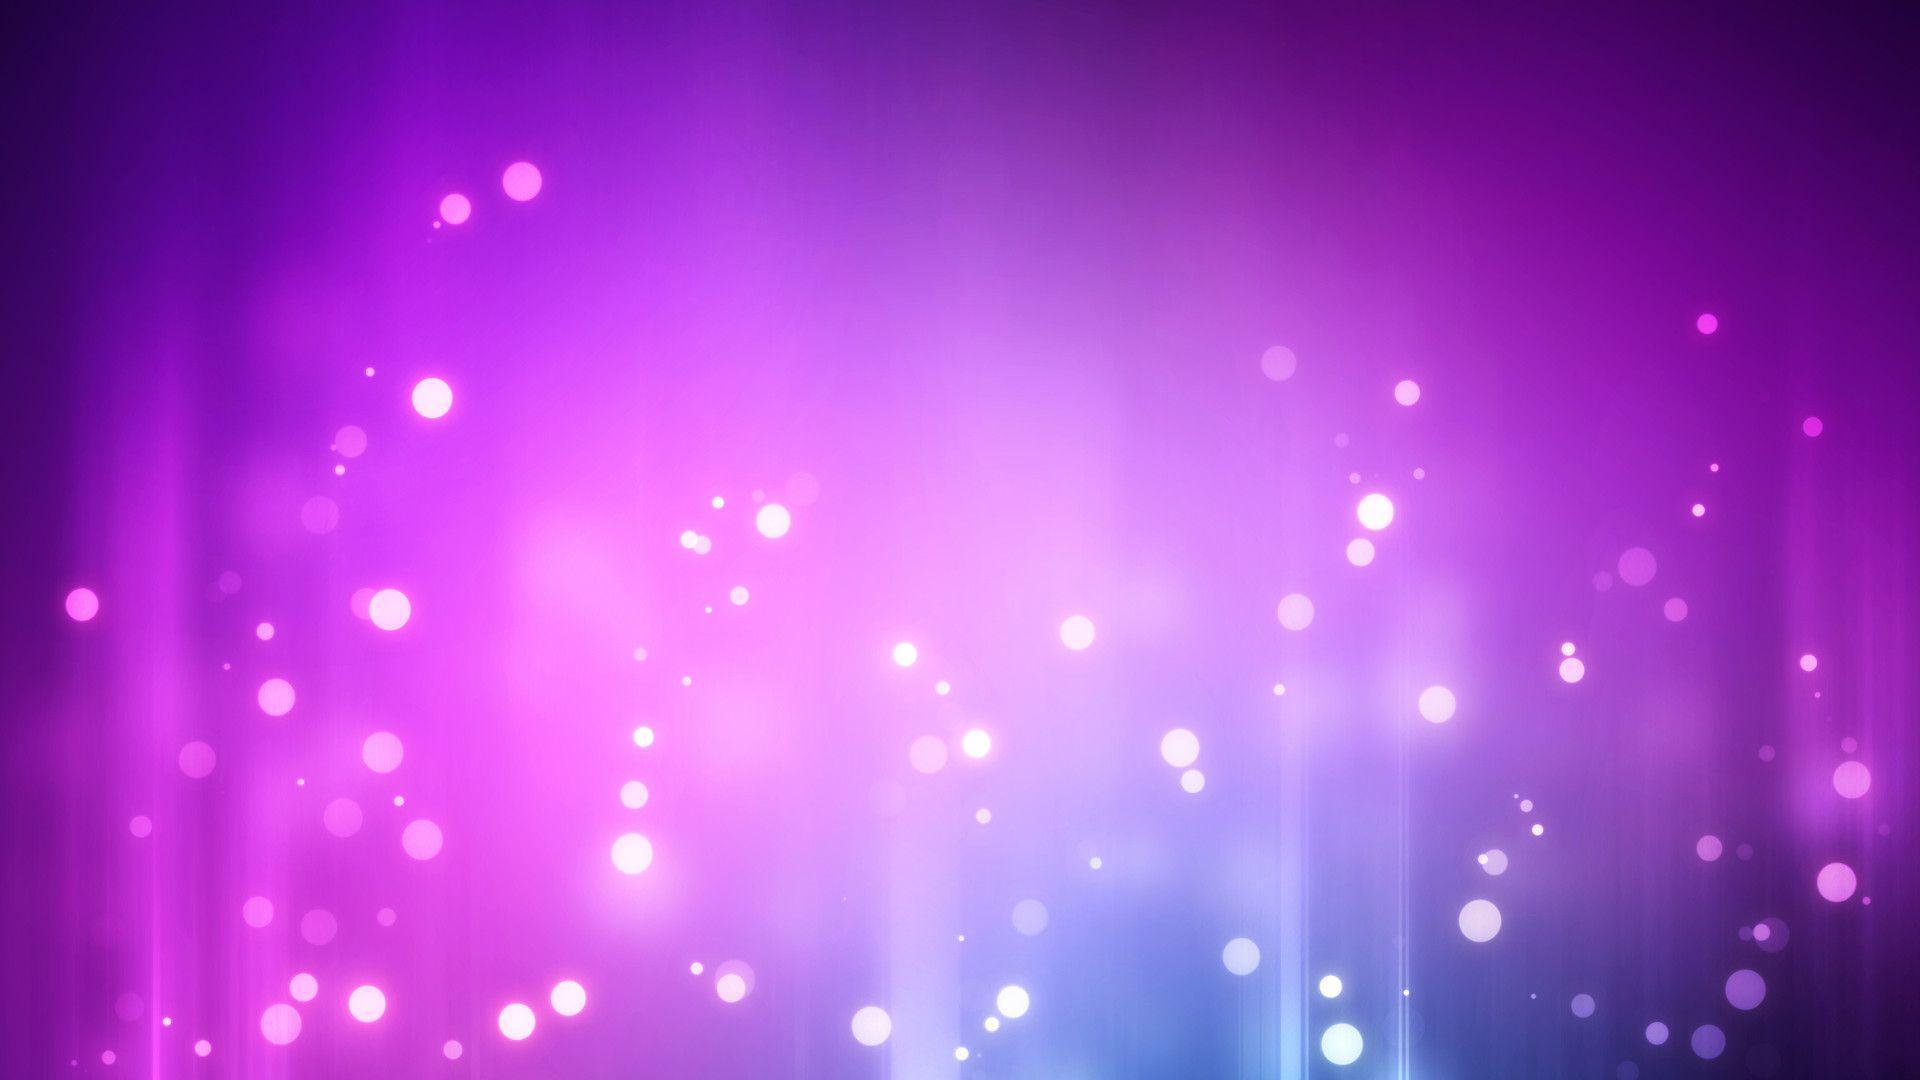 Wallpaper For > Purple And Blue Music Background